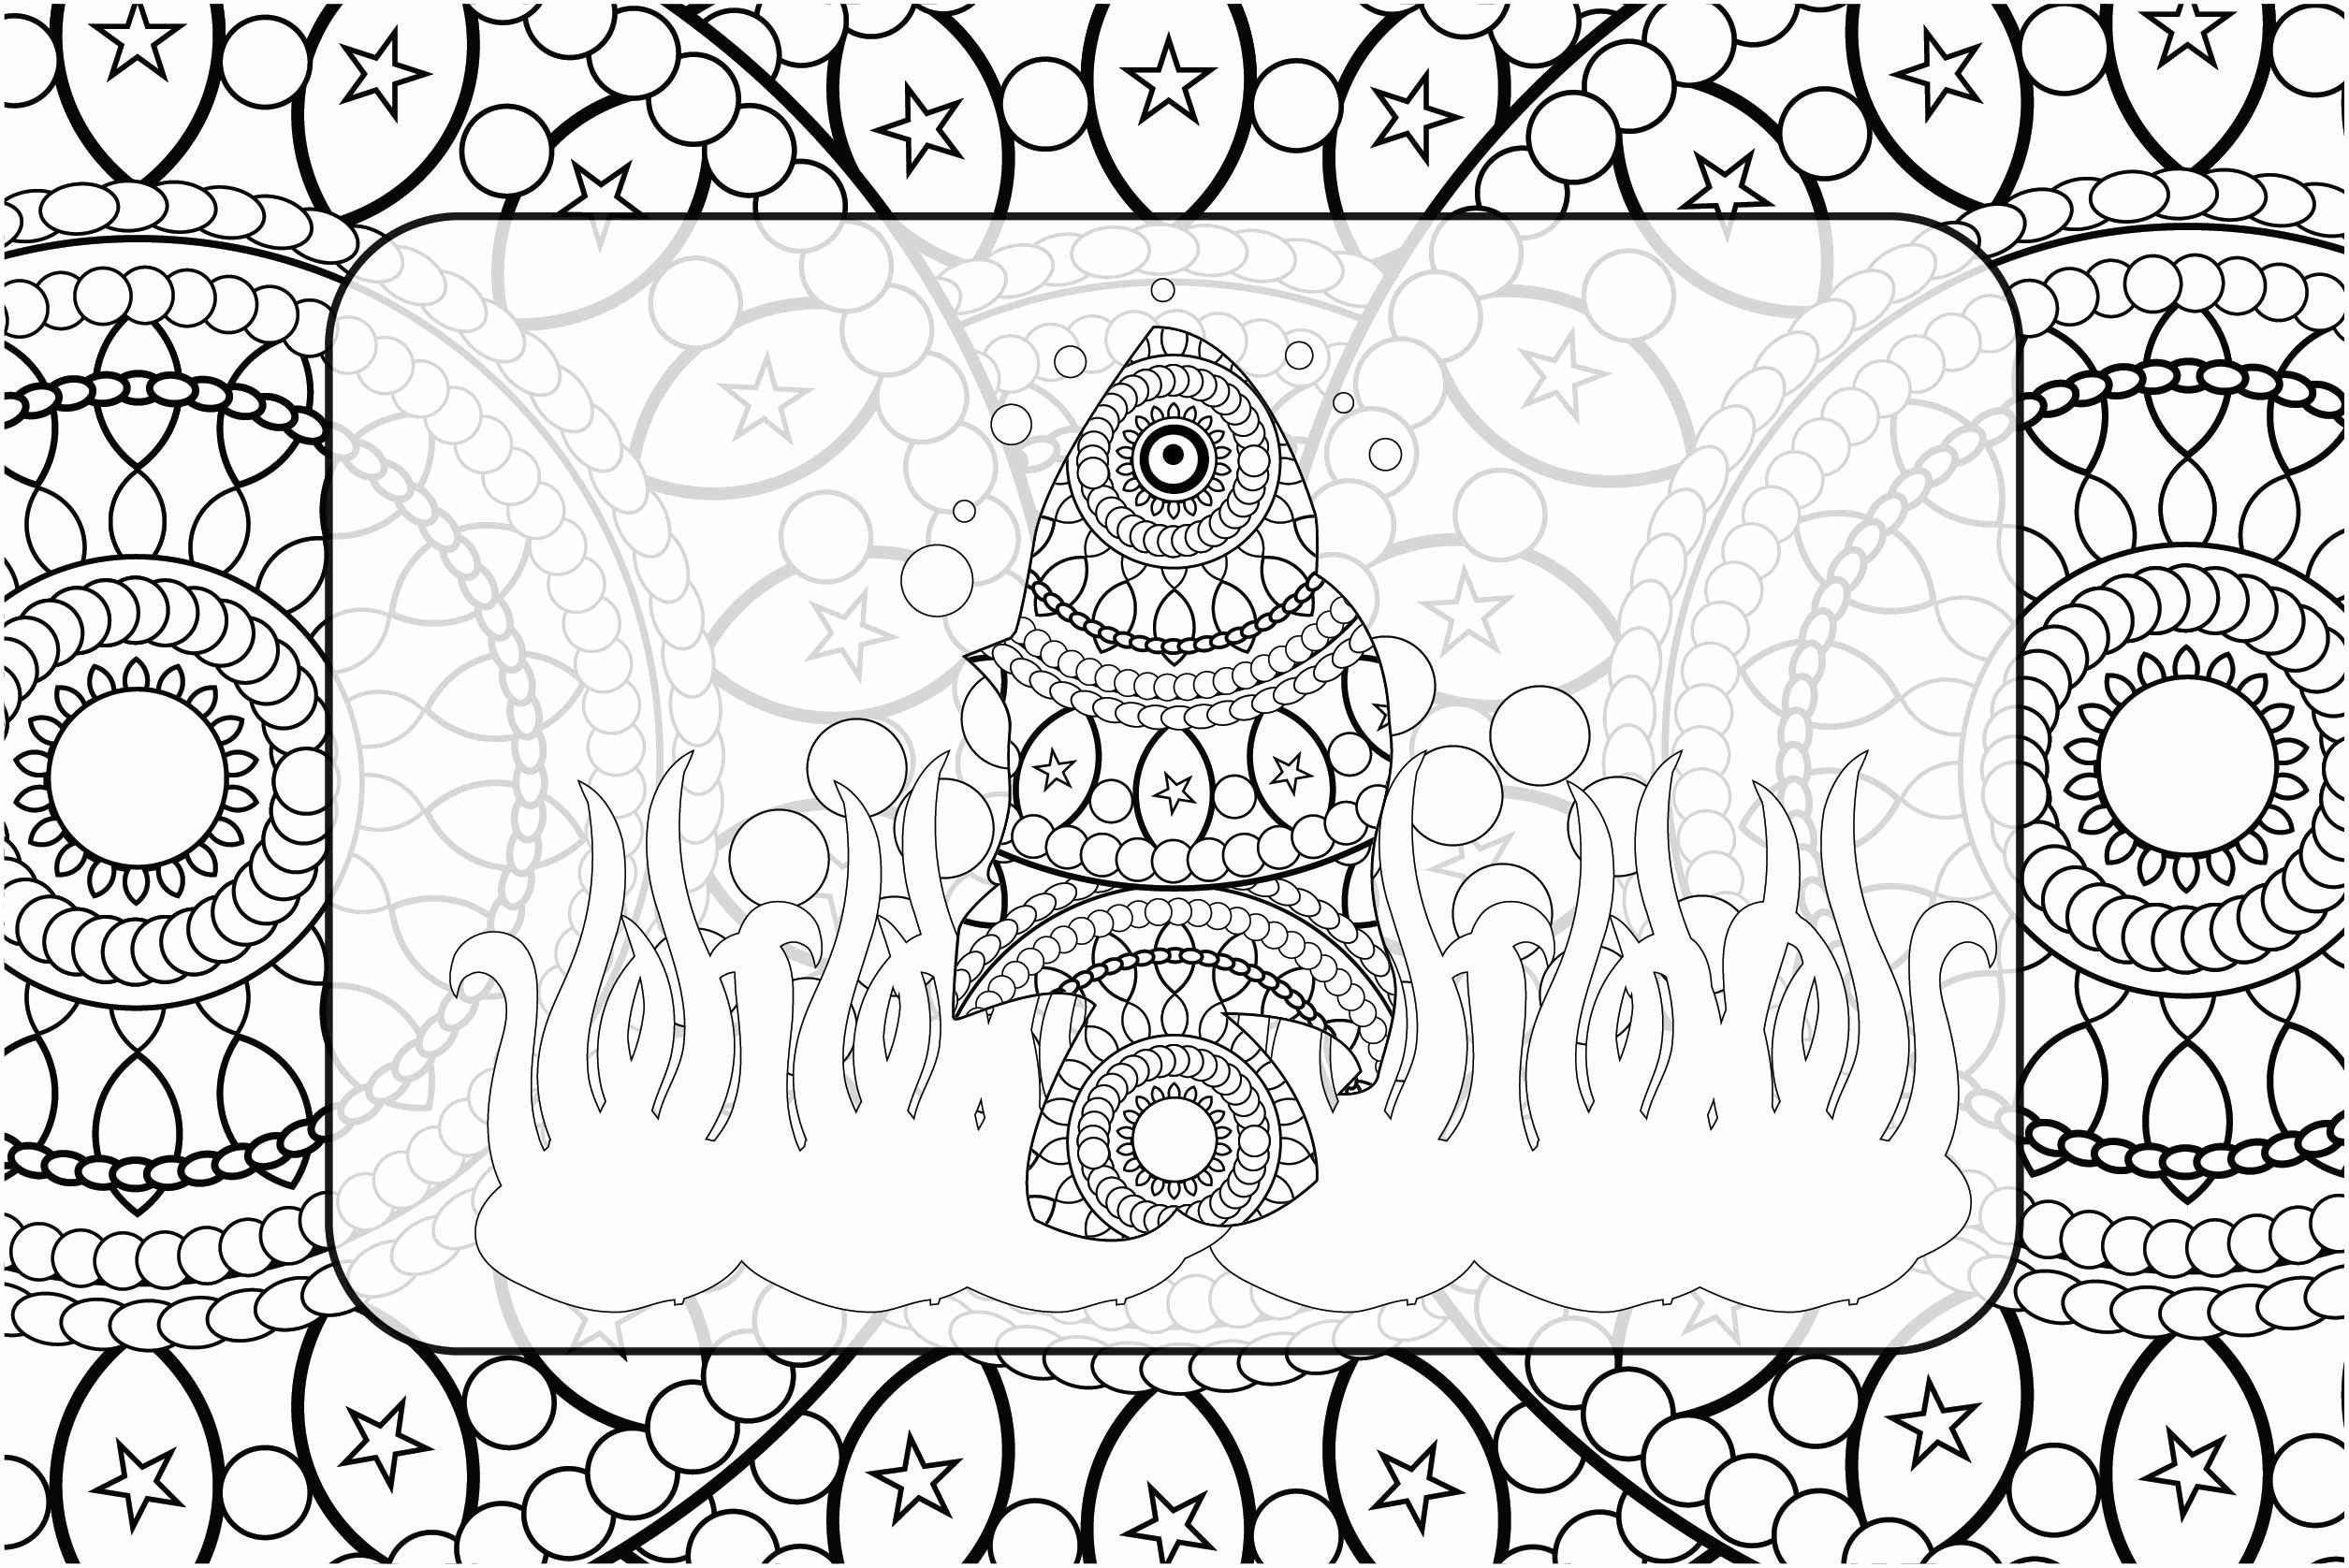 https://www.creativefabrica.com/wp-content/uploads/2022/09/17/Fish-Coloring-Page-KDP-Graphics-38676275-1.jpg